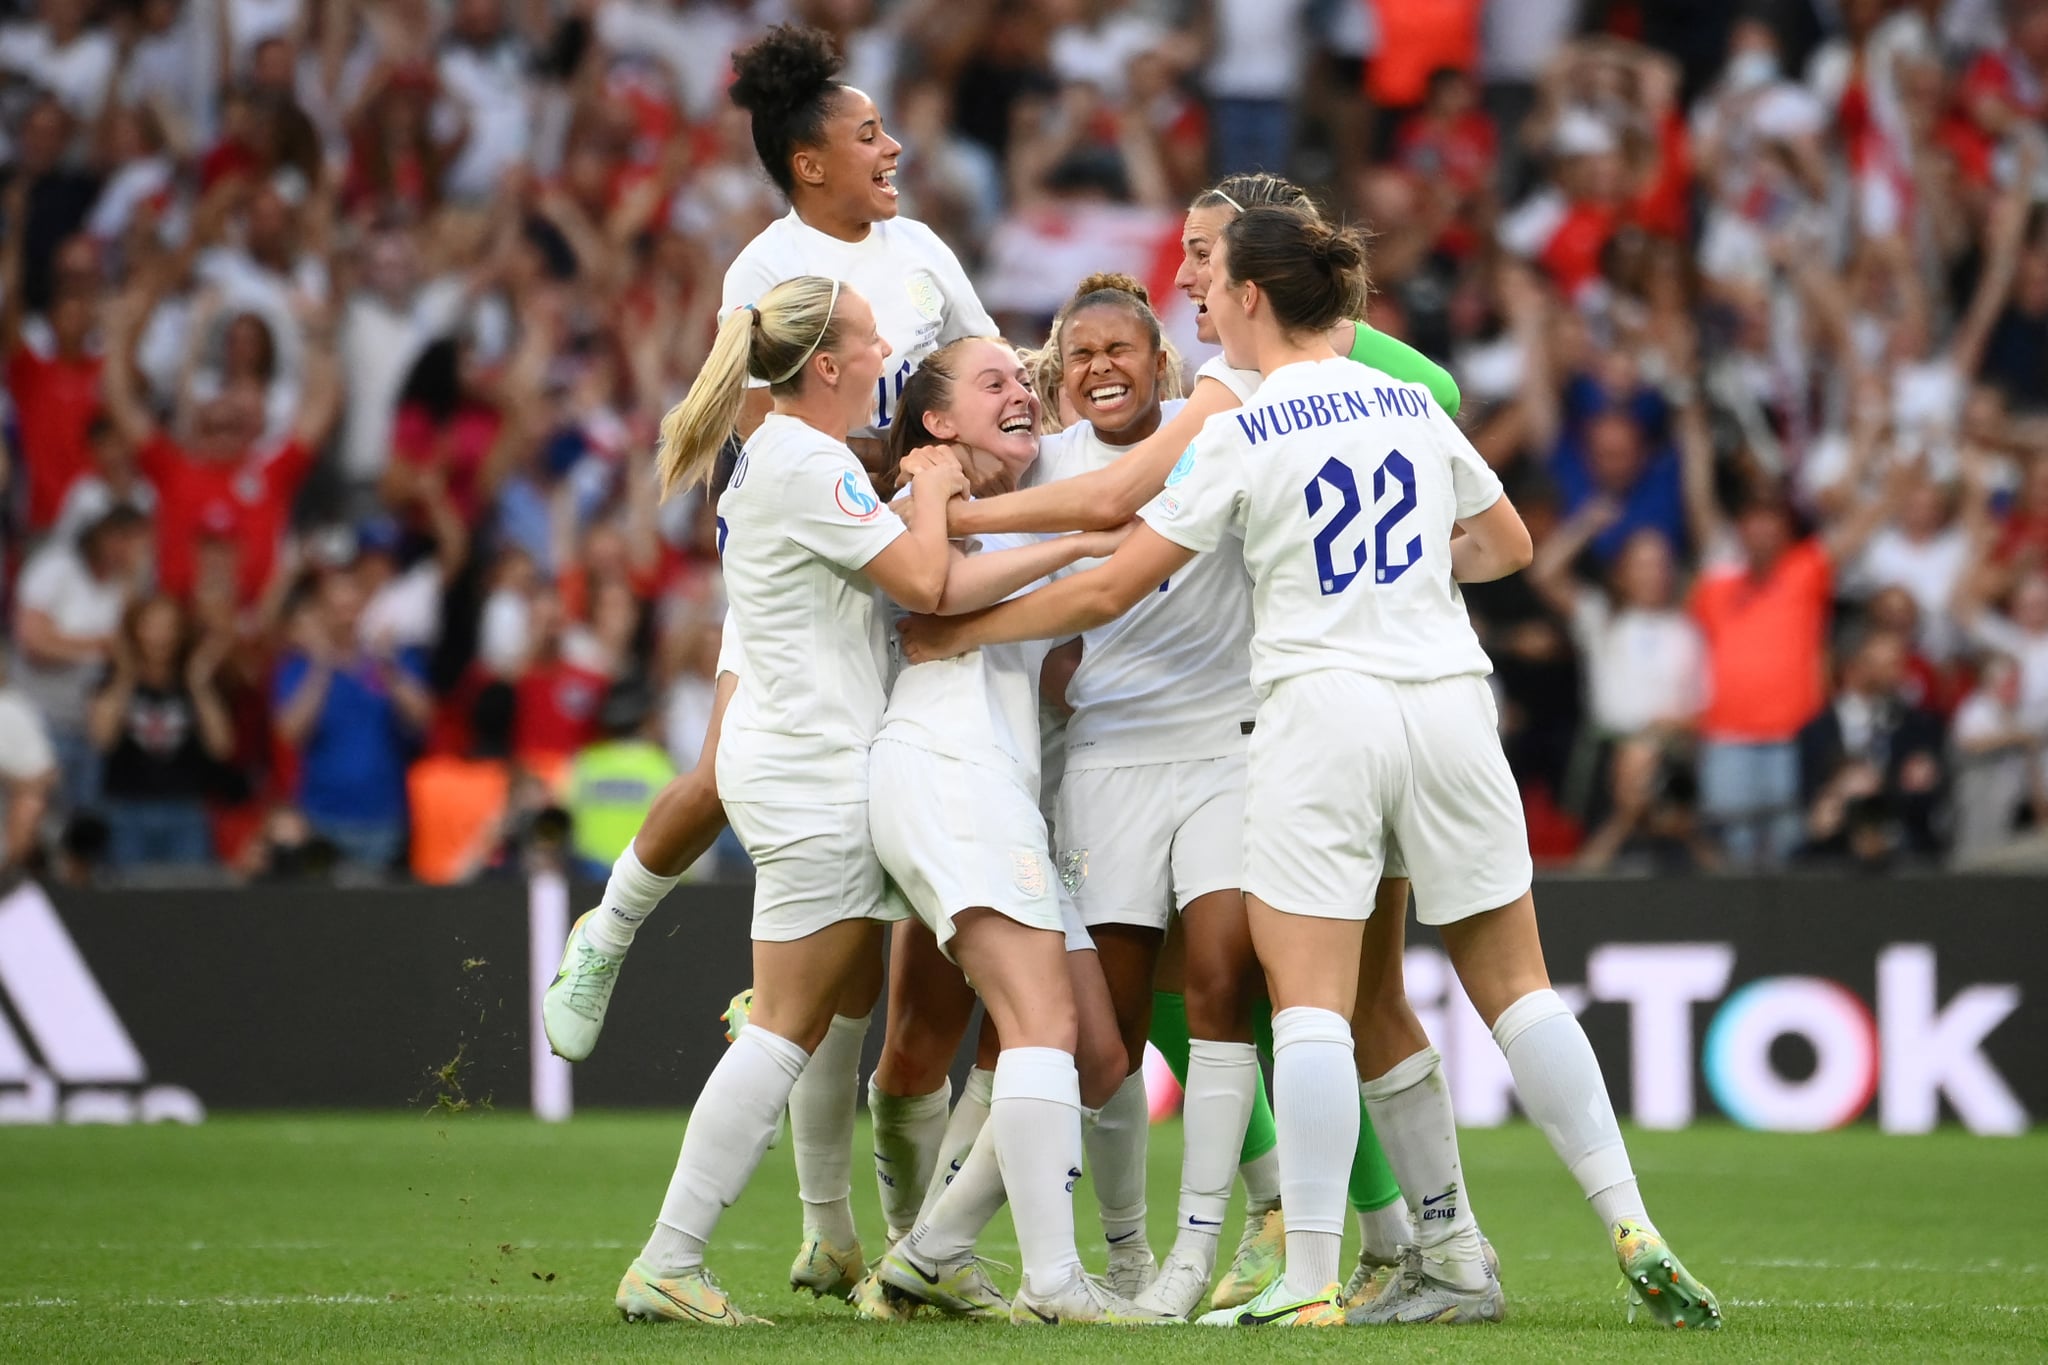 England's team players celebrate after winning at the end of the UEFA Women's Euro 2022 final football match between England and Germany at the Wembley stadium, in London, on July 31, 2022. - England won 2 - 1 against Germany - No use as moving pictures or quasi-video streaming. Photos must therefore be posted with an interval of at least 20 seconds. (Photo by FRANCK FIFE / AFP) / No use as moving pictures or quasi-video streaming. Photos must therefore be posted with an interval of at least 20 seconds. (Photo by FRANCK FIFE/AFP via Getty Images)